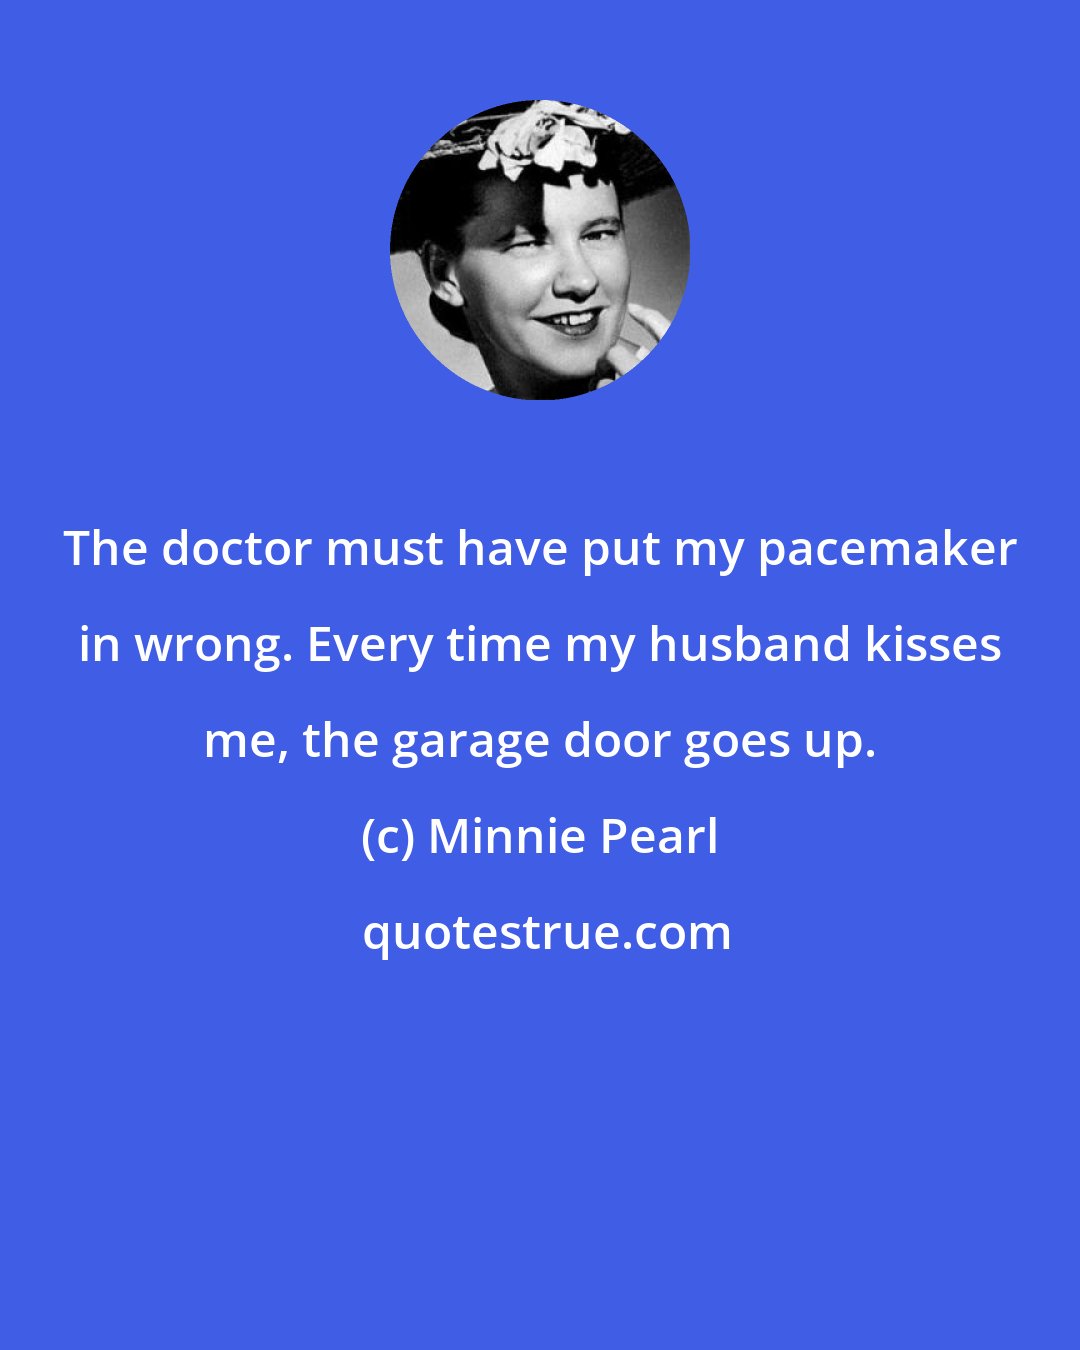 Minnie Pearl: The doctor must have put my pacemaker in wrong. Every time my husband kisses me, the garage door goes up.